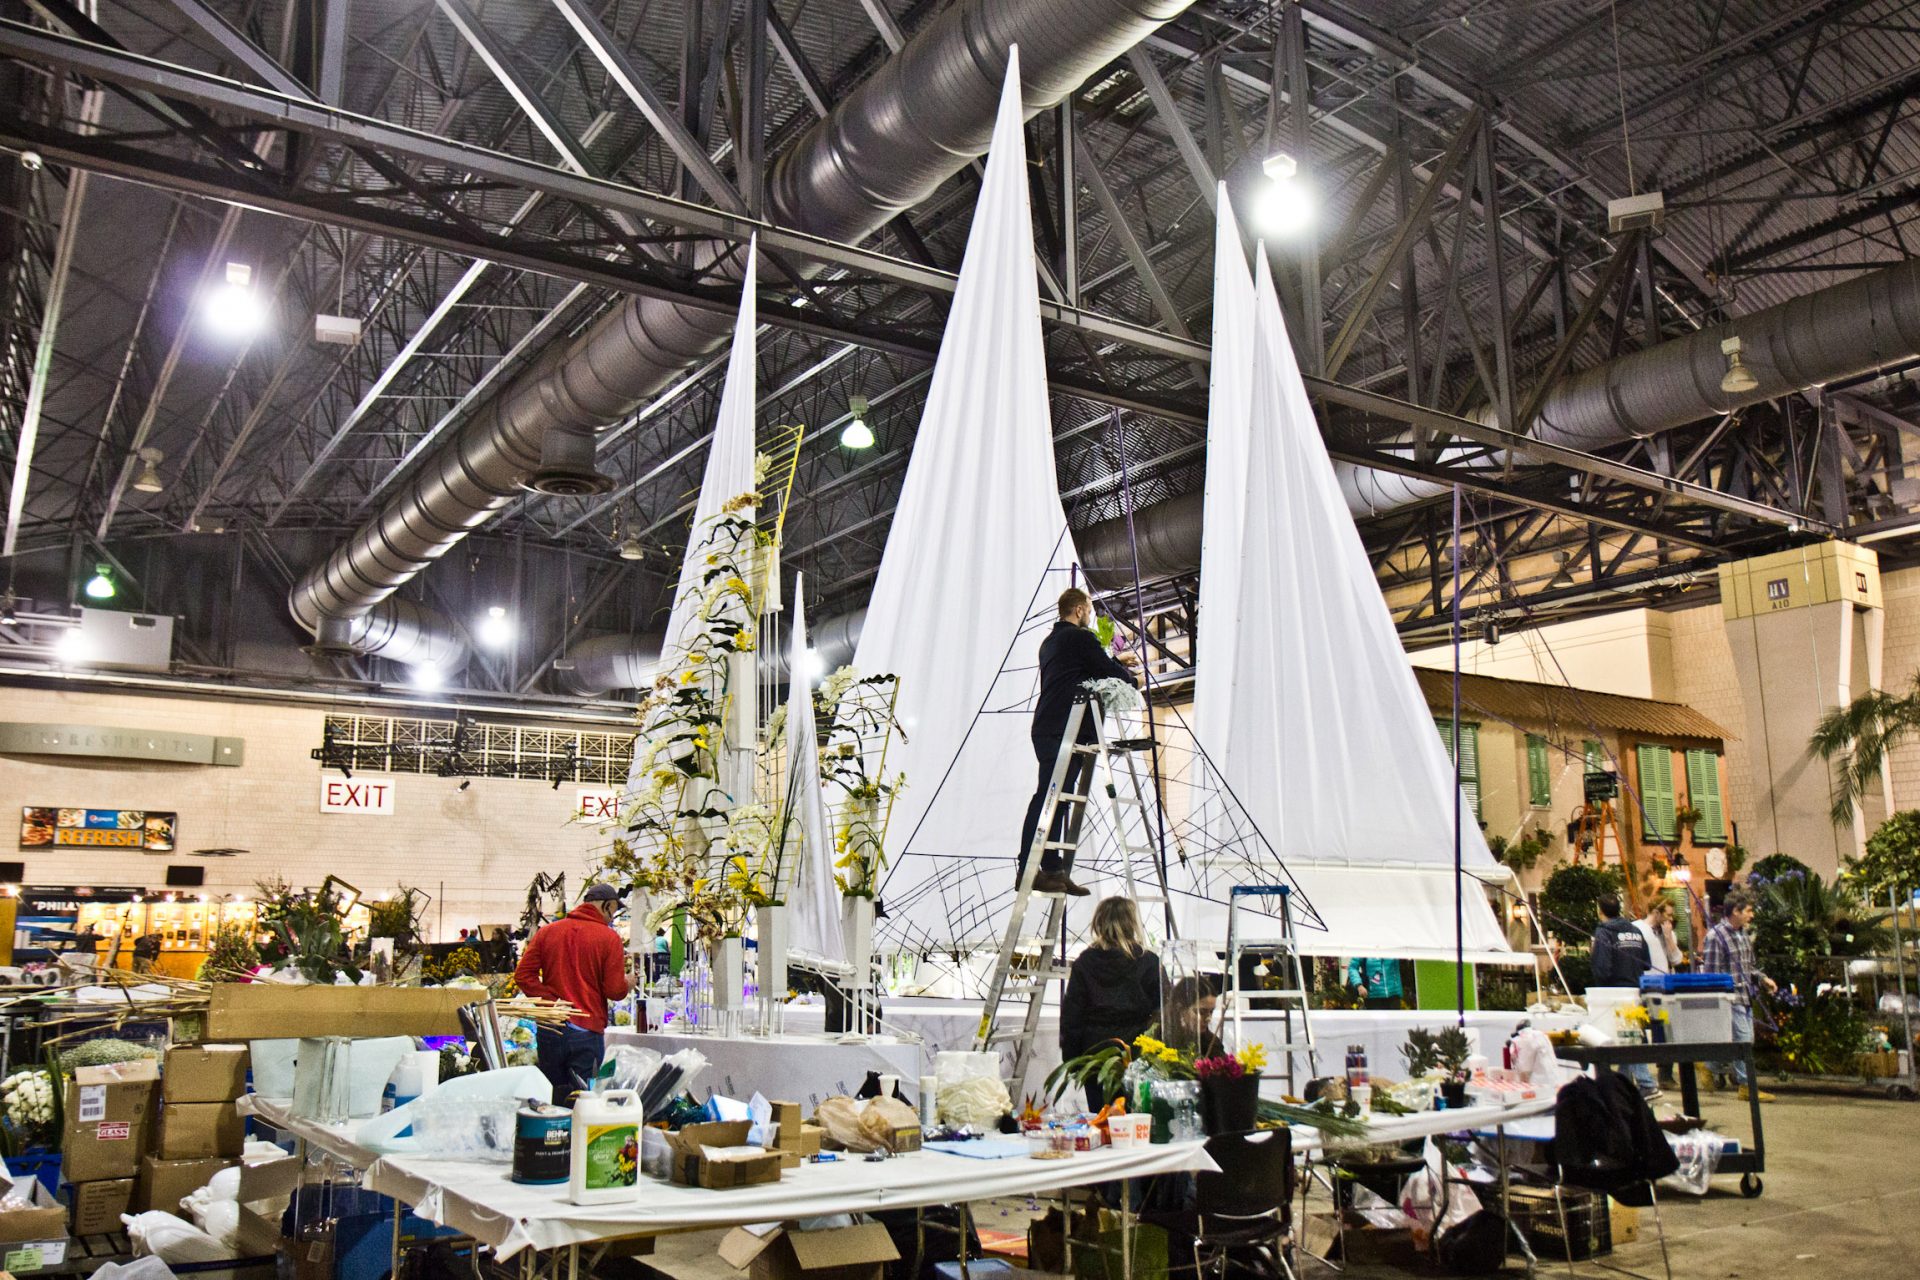 “On the Sea” a design by Haddonfield’s Arrange, Floral and Event Design, being built Thursday at the 2020 Flower Show.